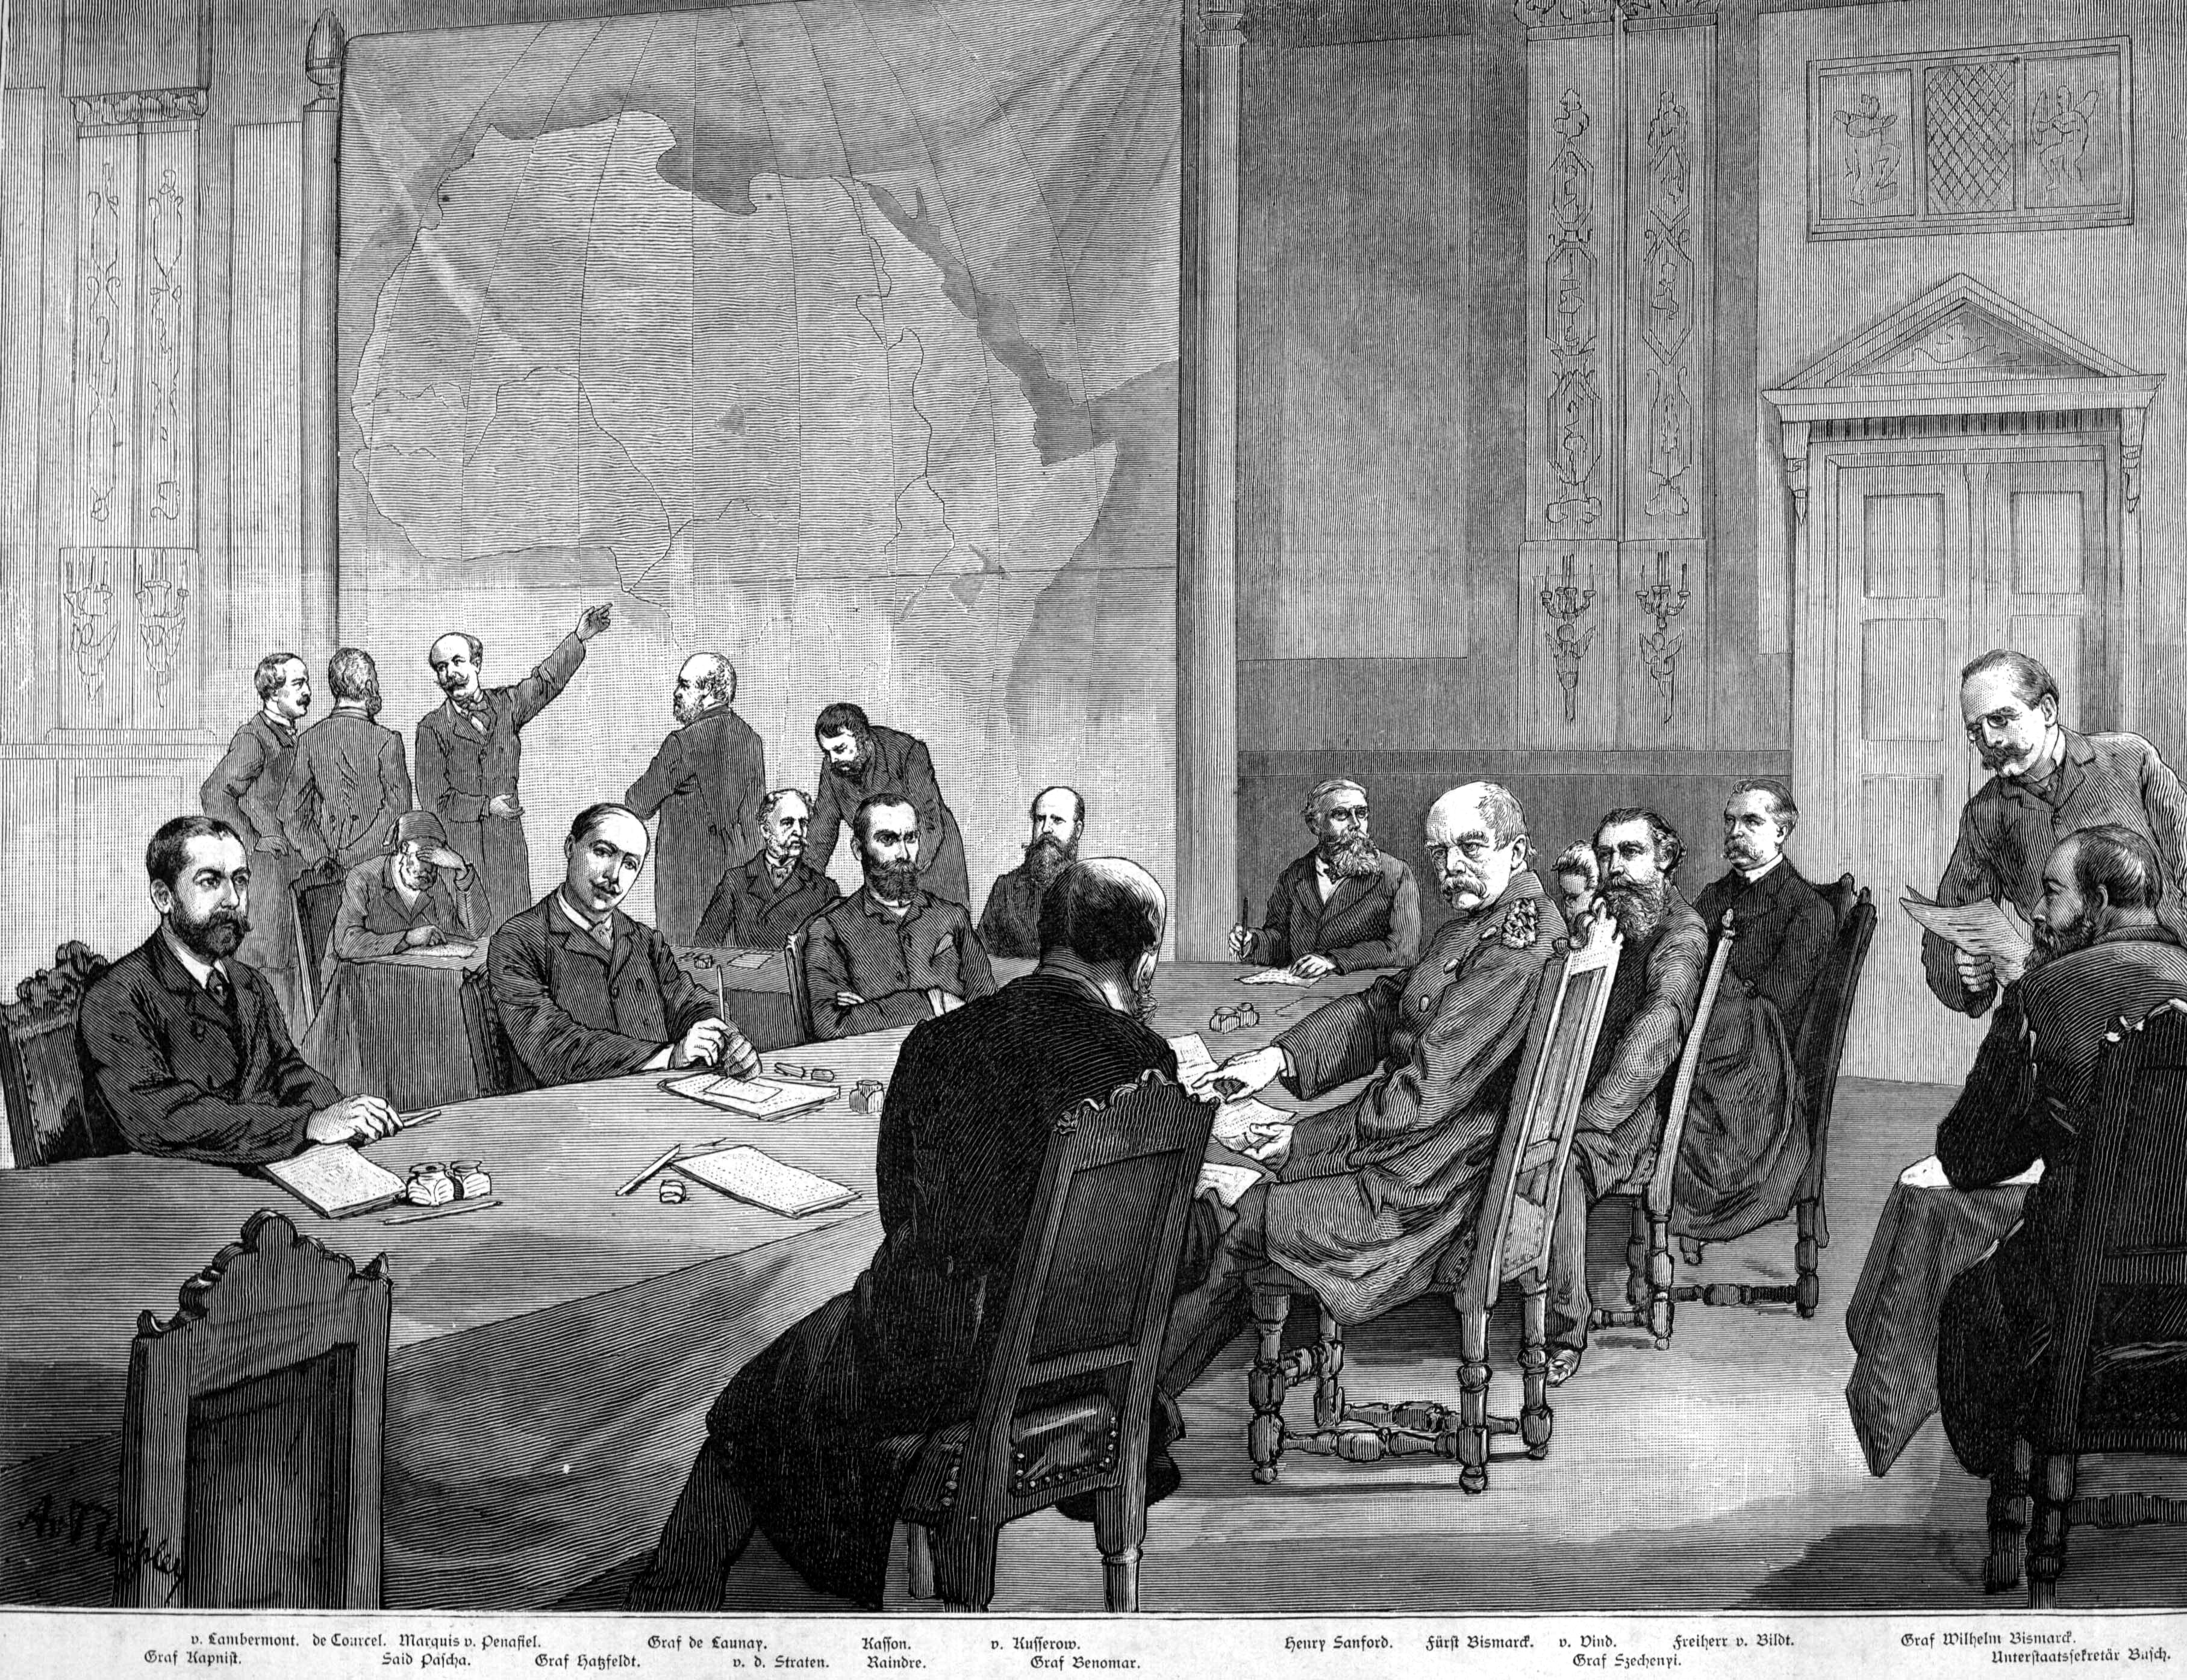 A newspaper print showing men gathered around a table at the Berlin Conference of 1884 to 1885. Several appear to be discussing a large map of Africa.